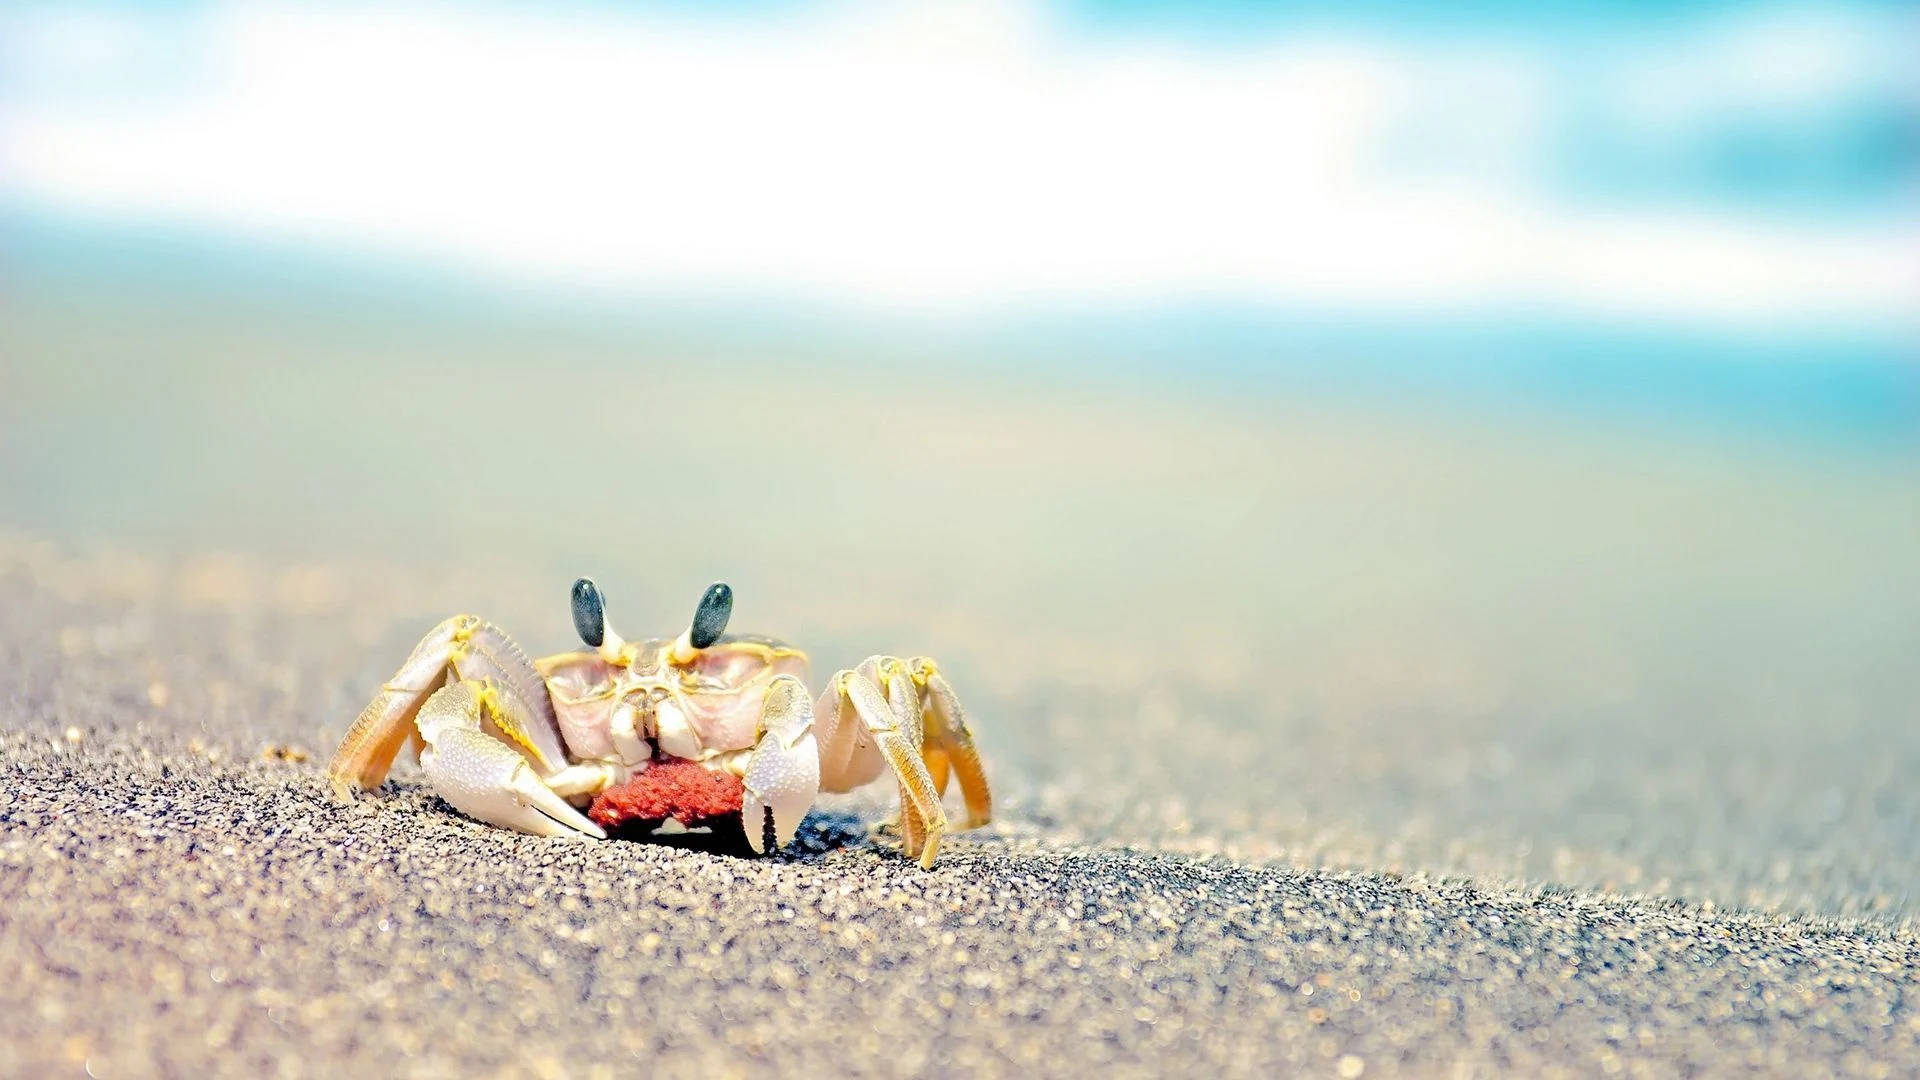 Small Crab In Beach Sand Background